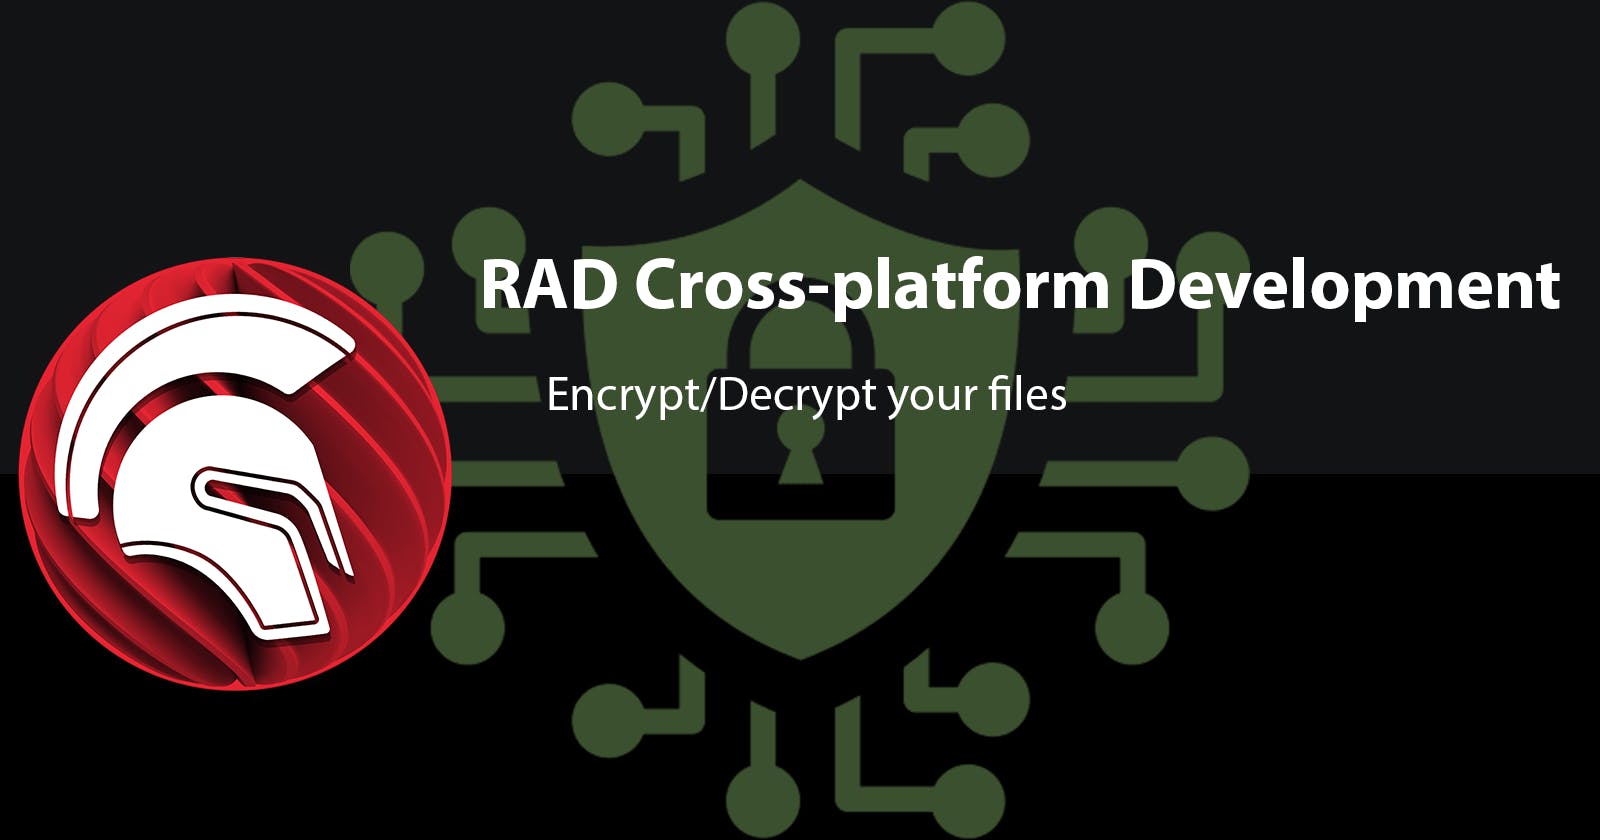 How To: Cross Platform File Encryption with Delphi